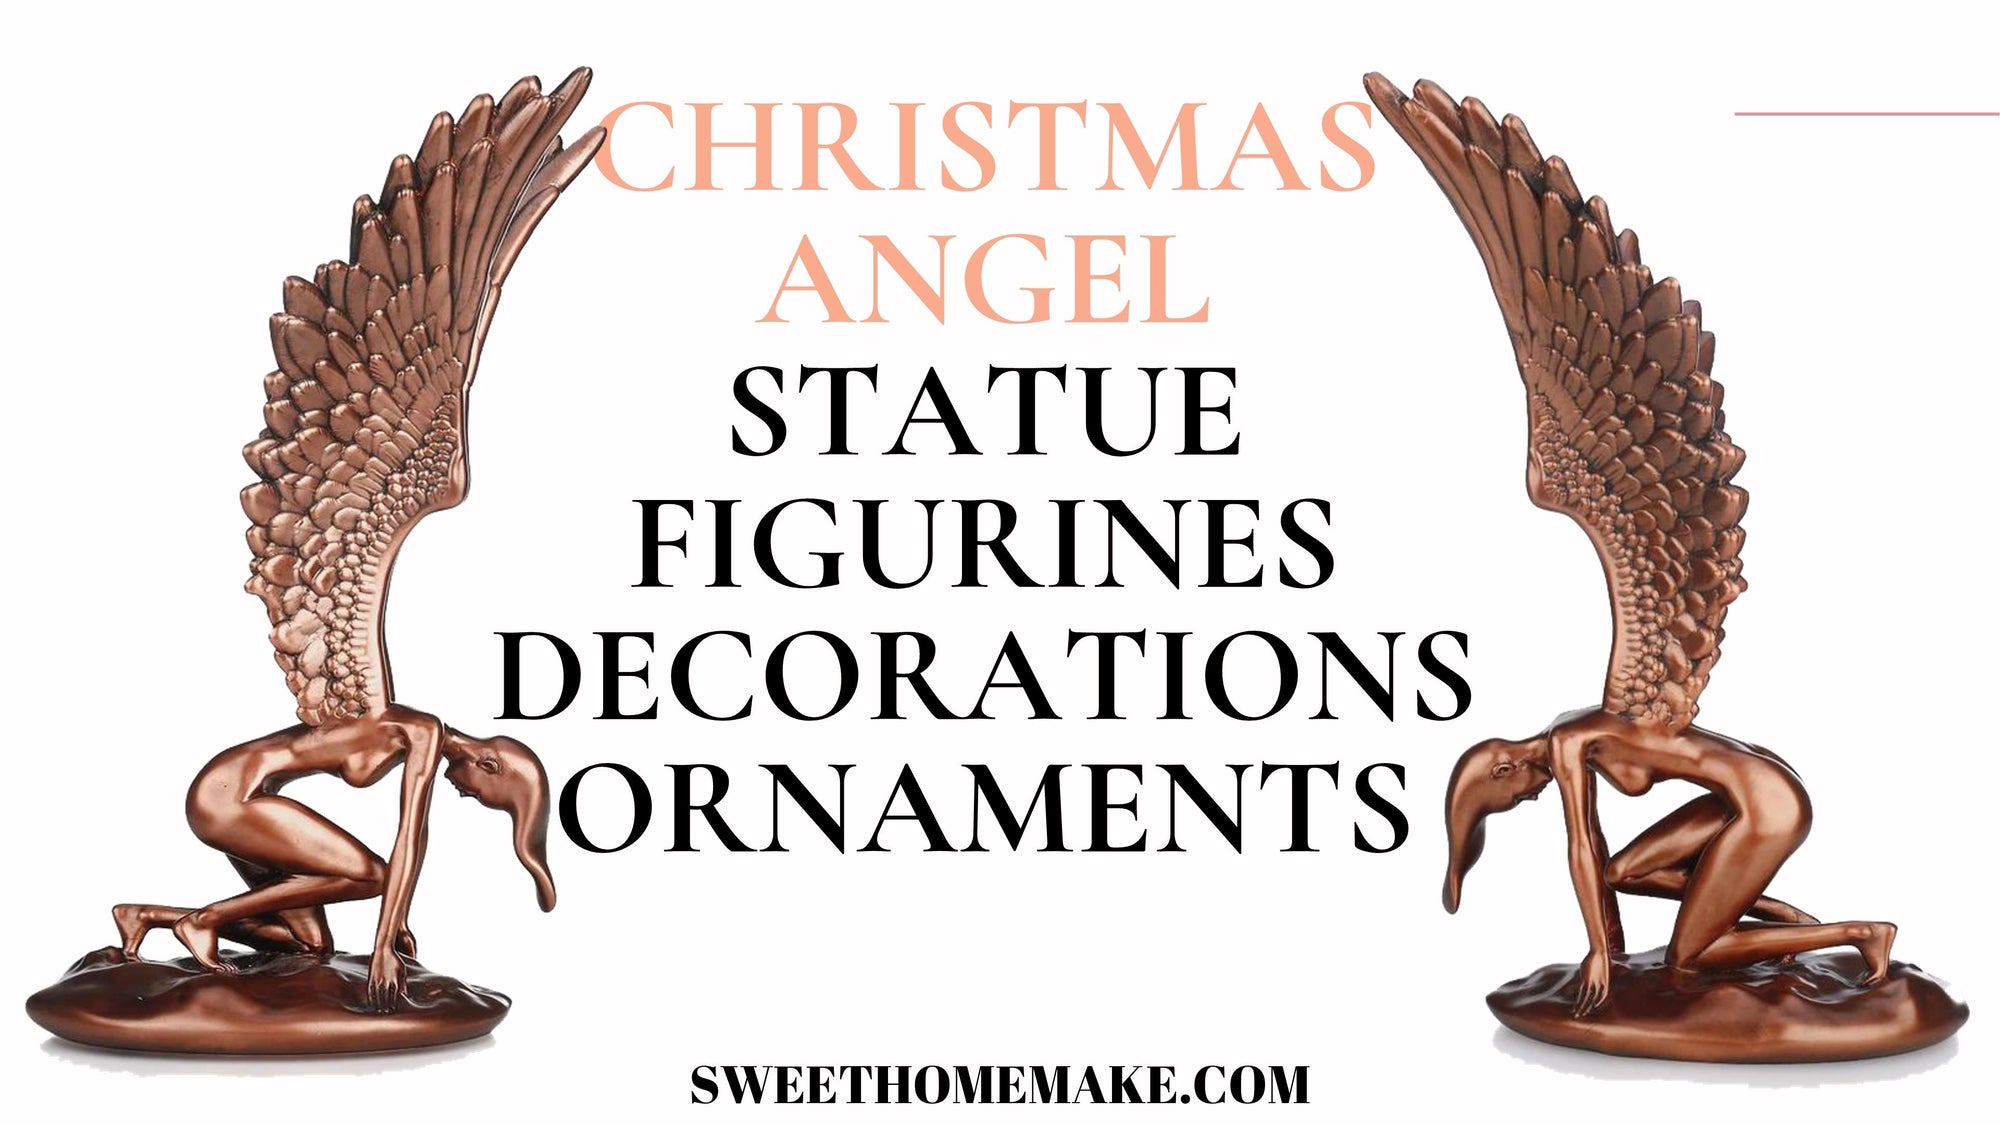 Chrsitmas Angel Statue and Figurines Ornaments Decor